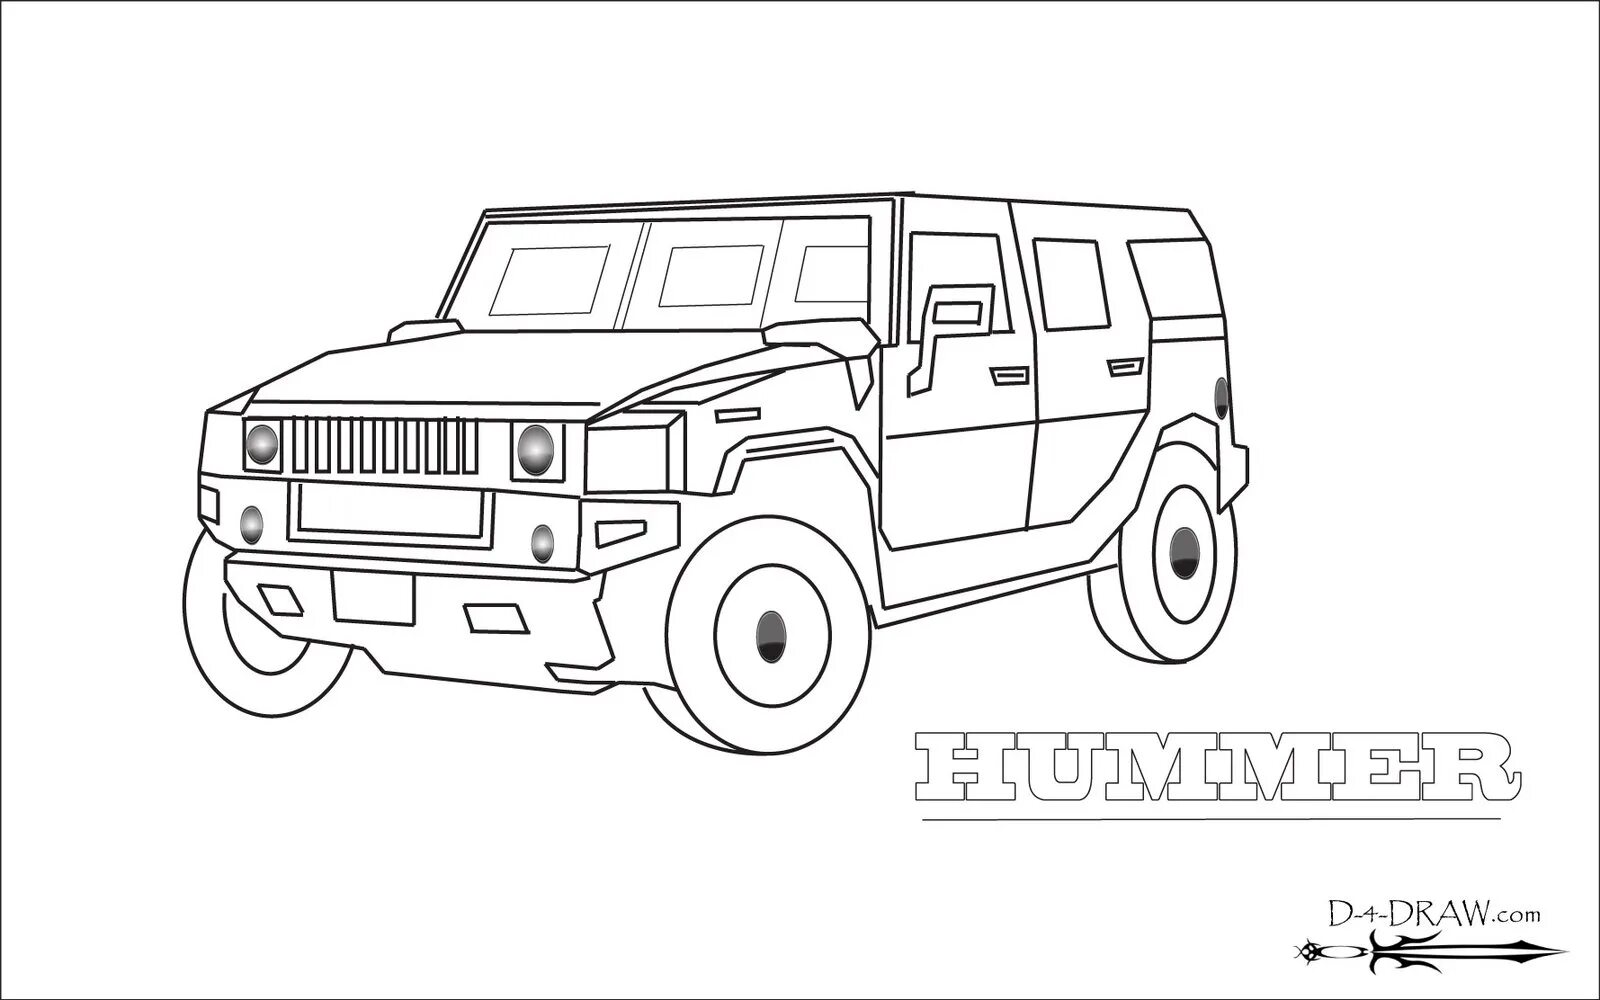 Bright limousine coloring pages for kids